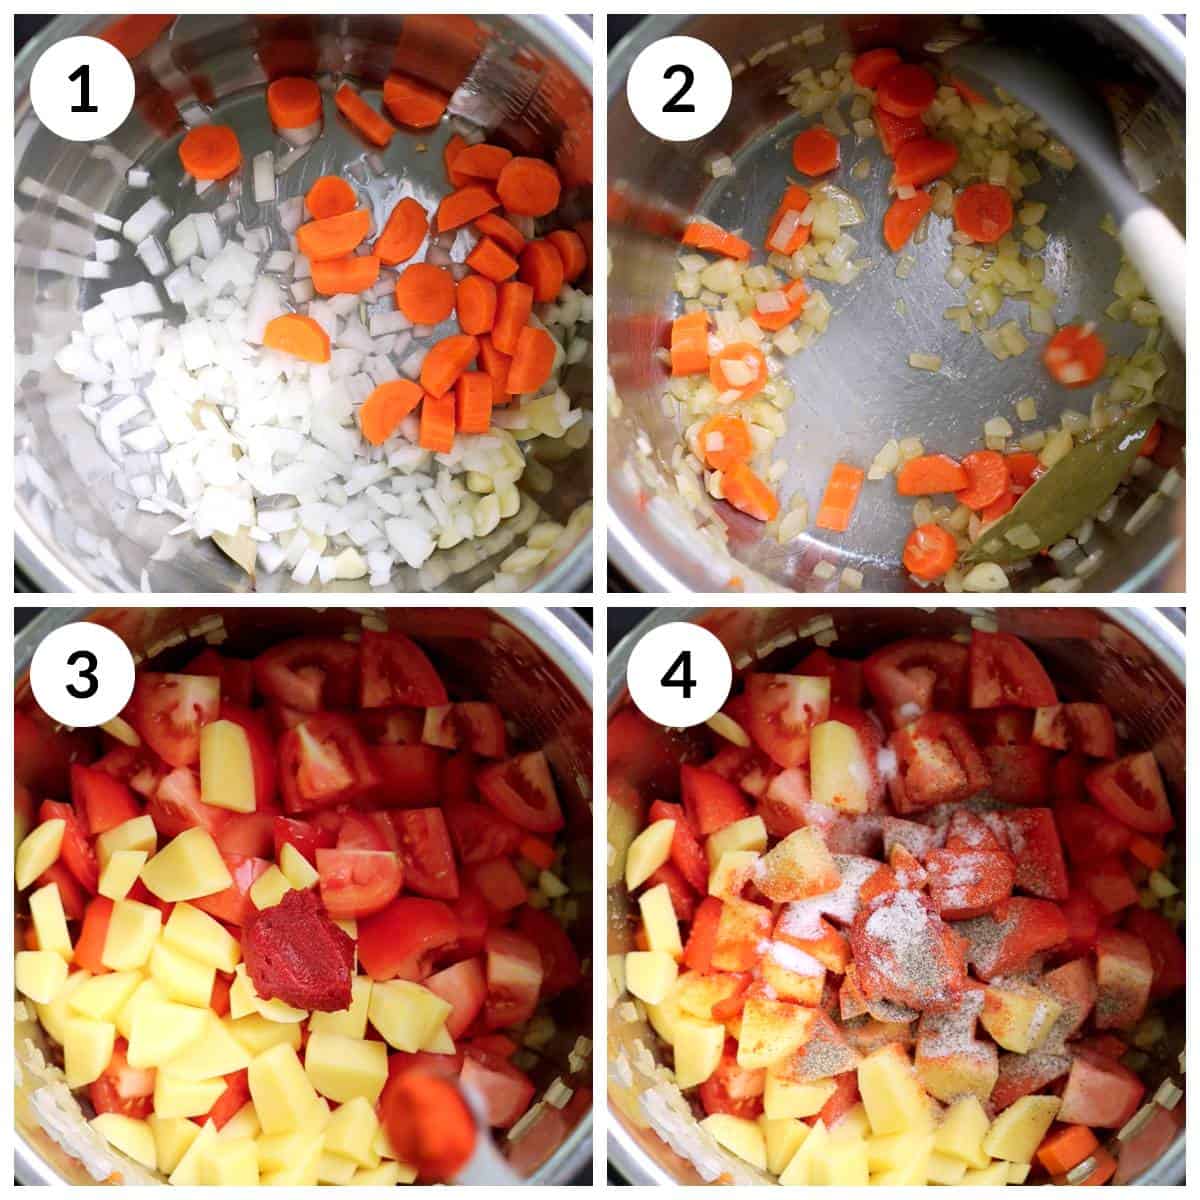 Steps for adding veggies and spices to the Instant Pot to make creamy vegan tomato soup